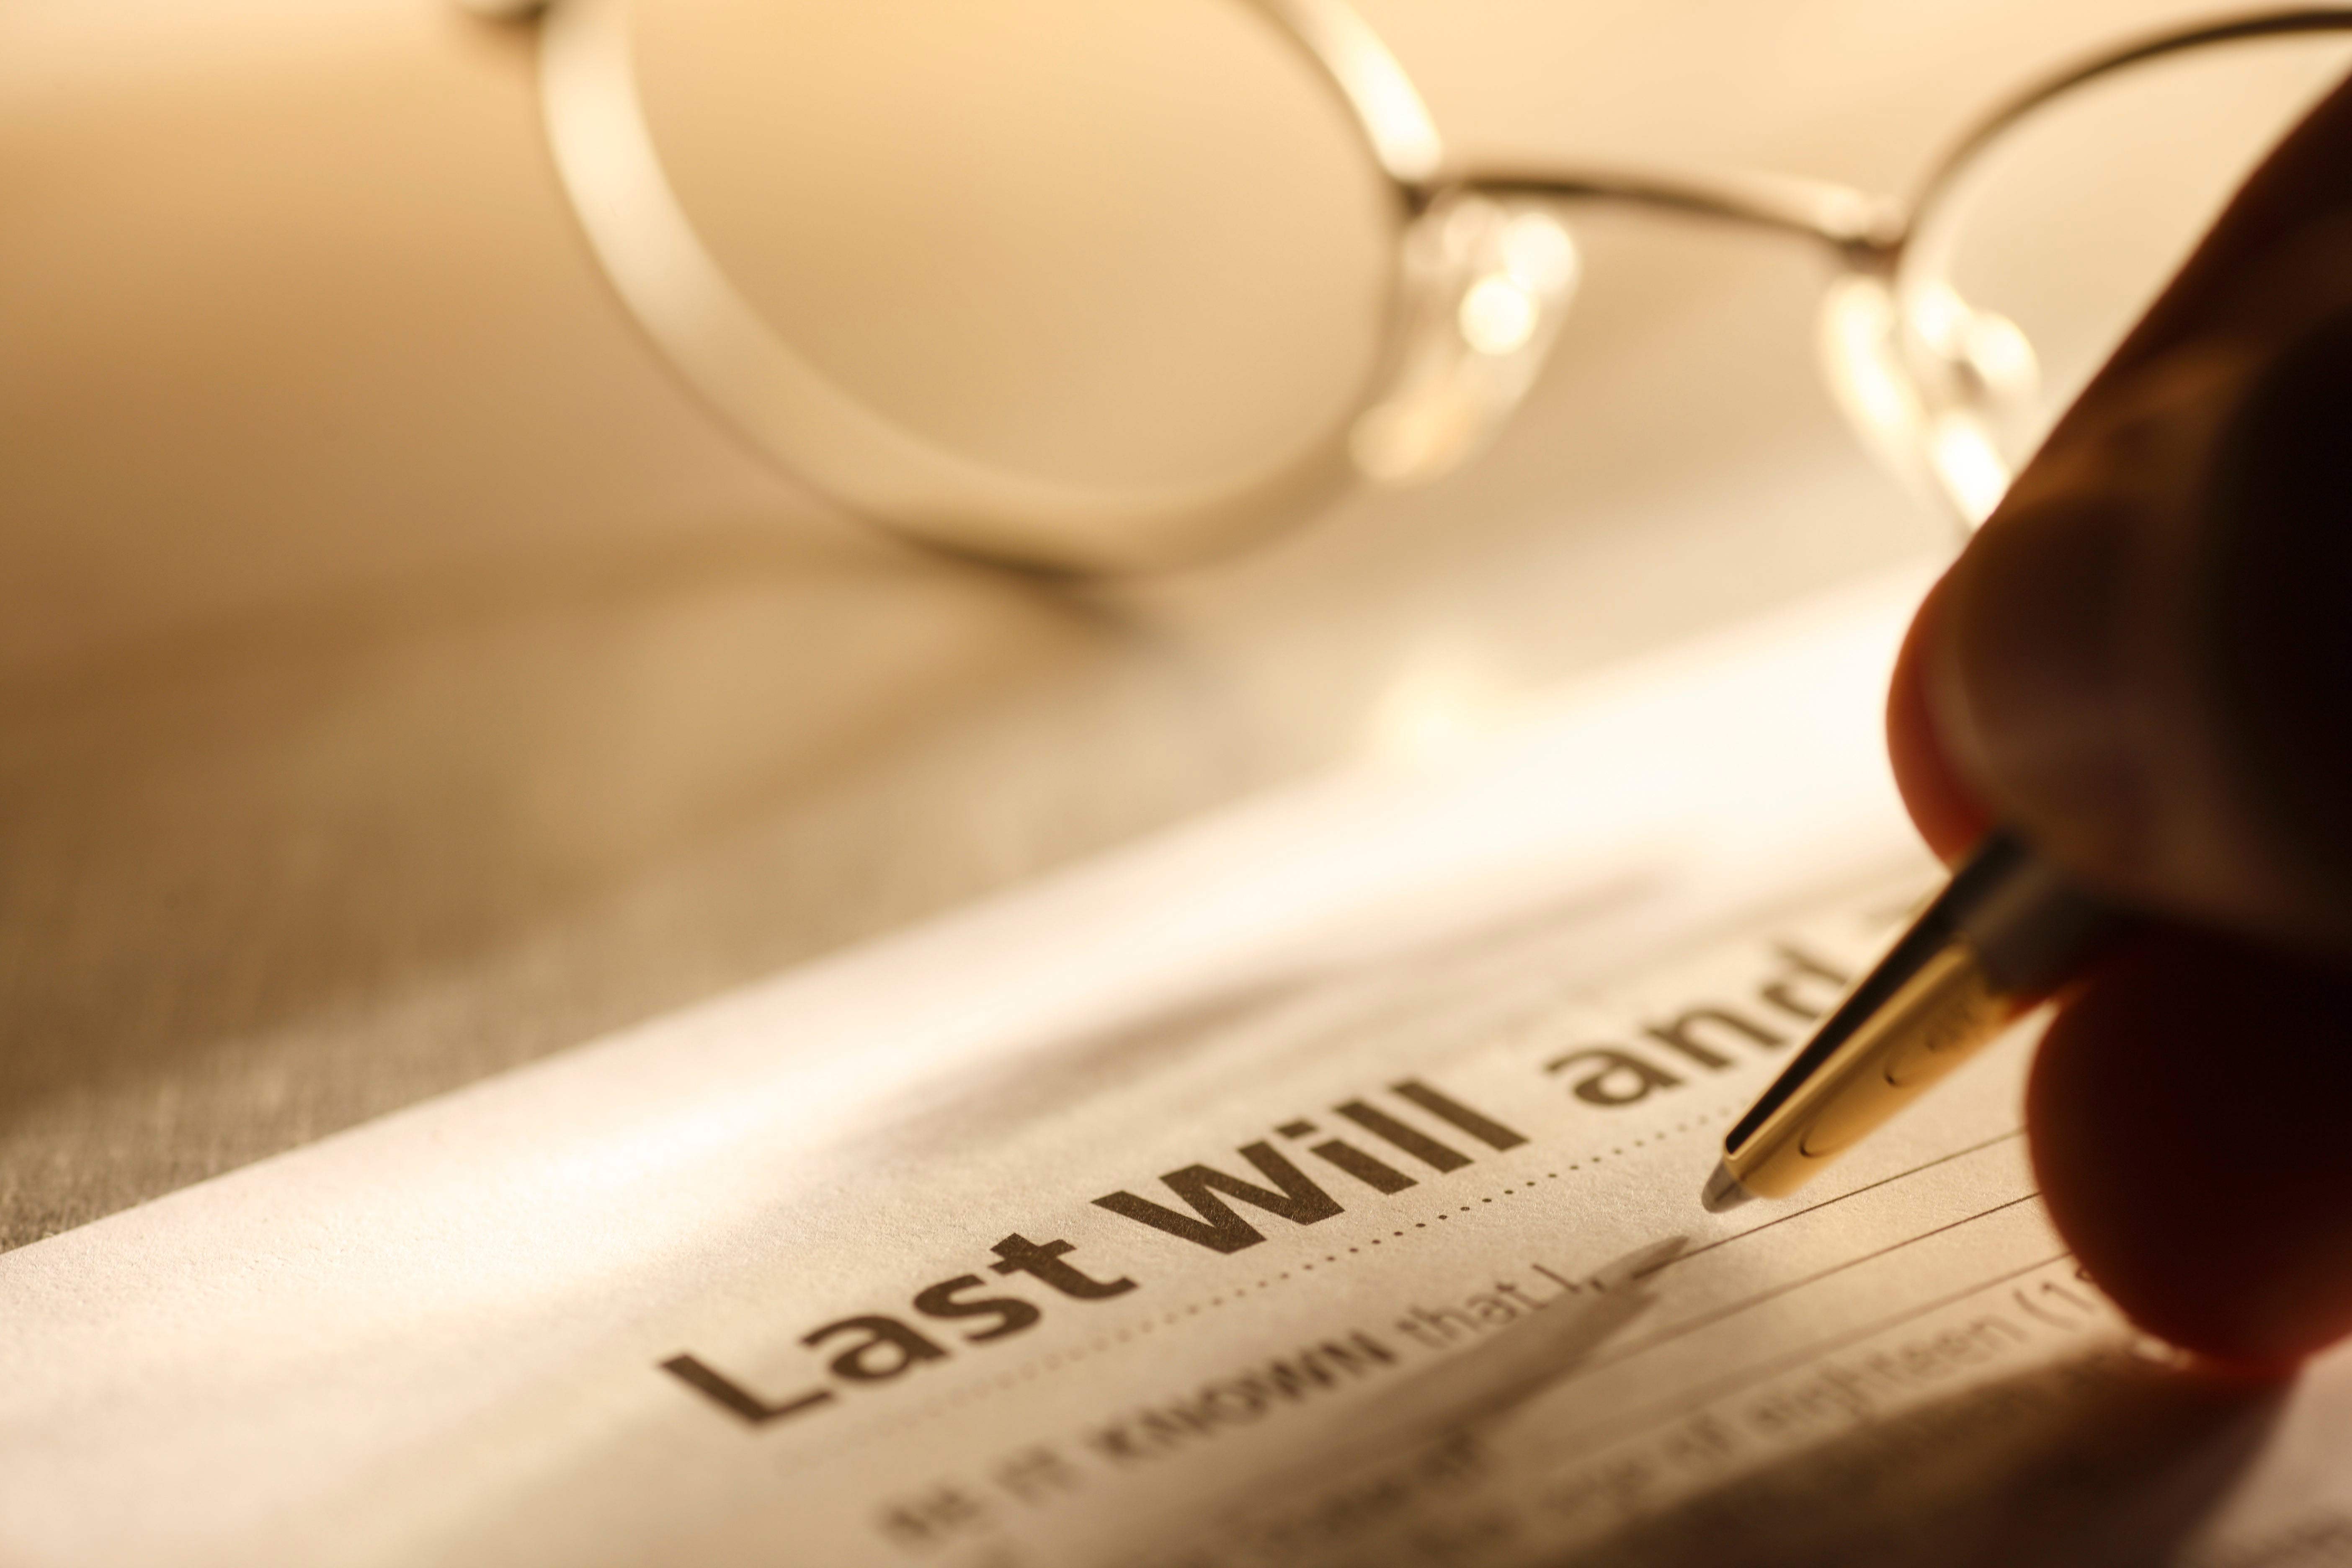 Changes to enduring powers of attorney and advance health directives in Queensland